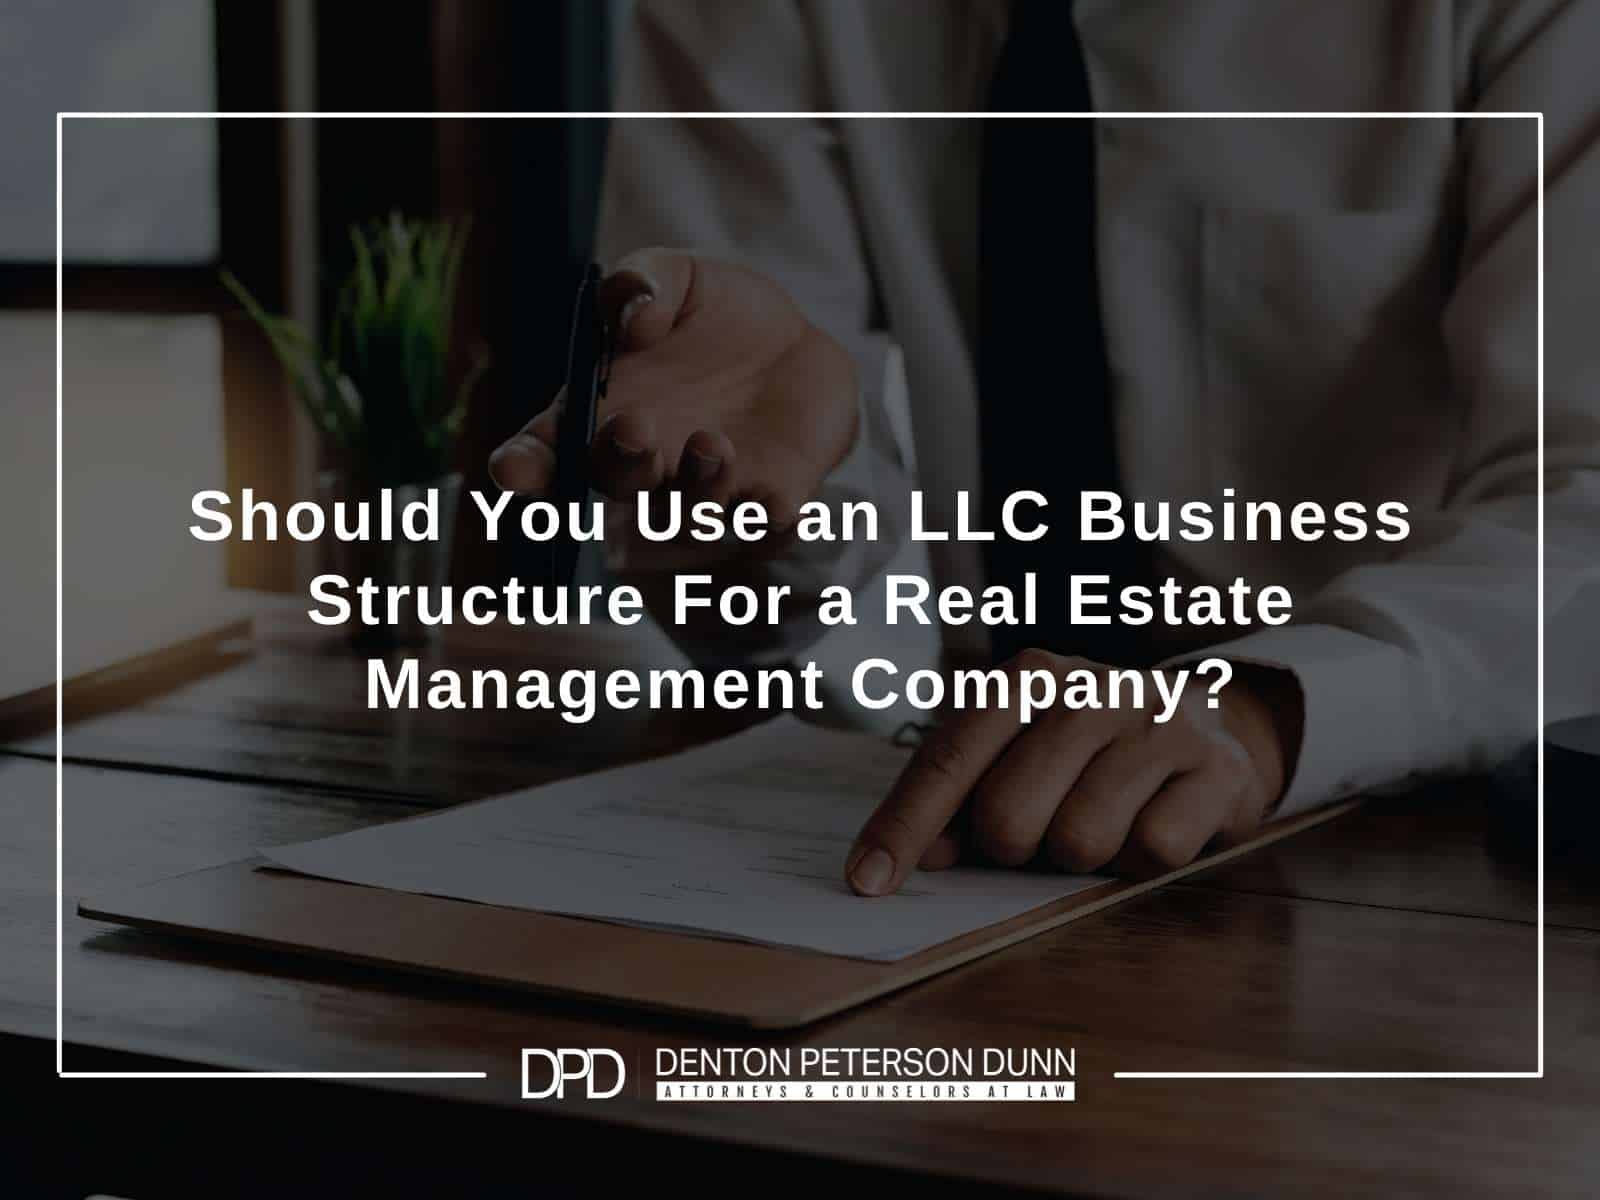 Should You Use an LLC Business Structure For a Real Estate Management Company?